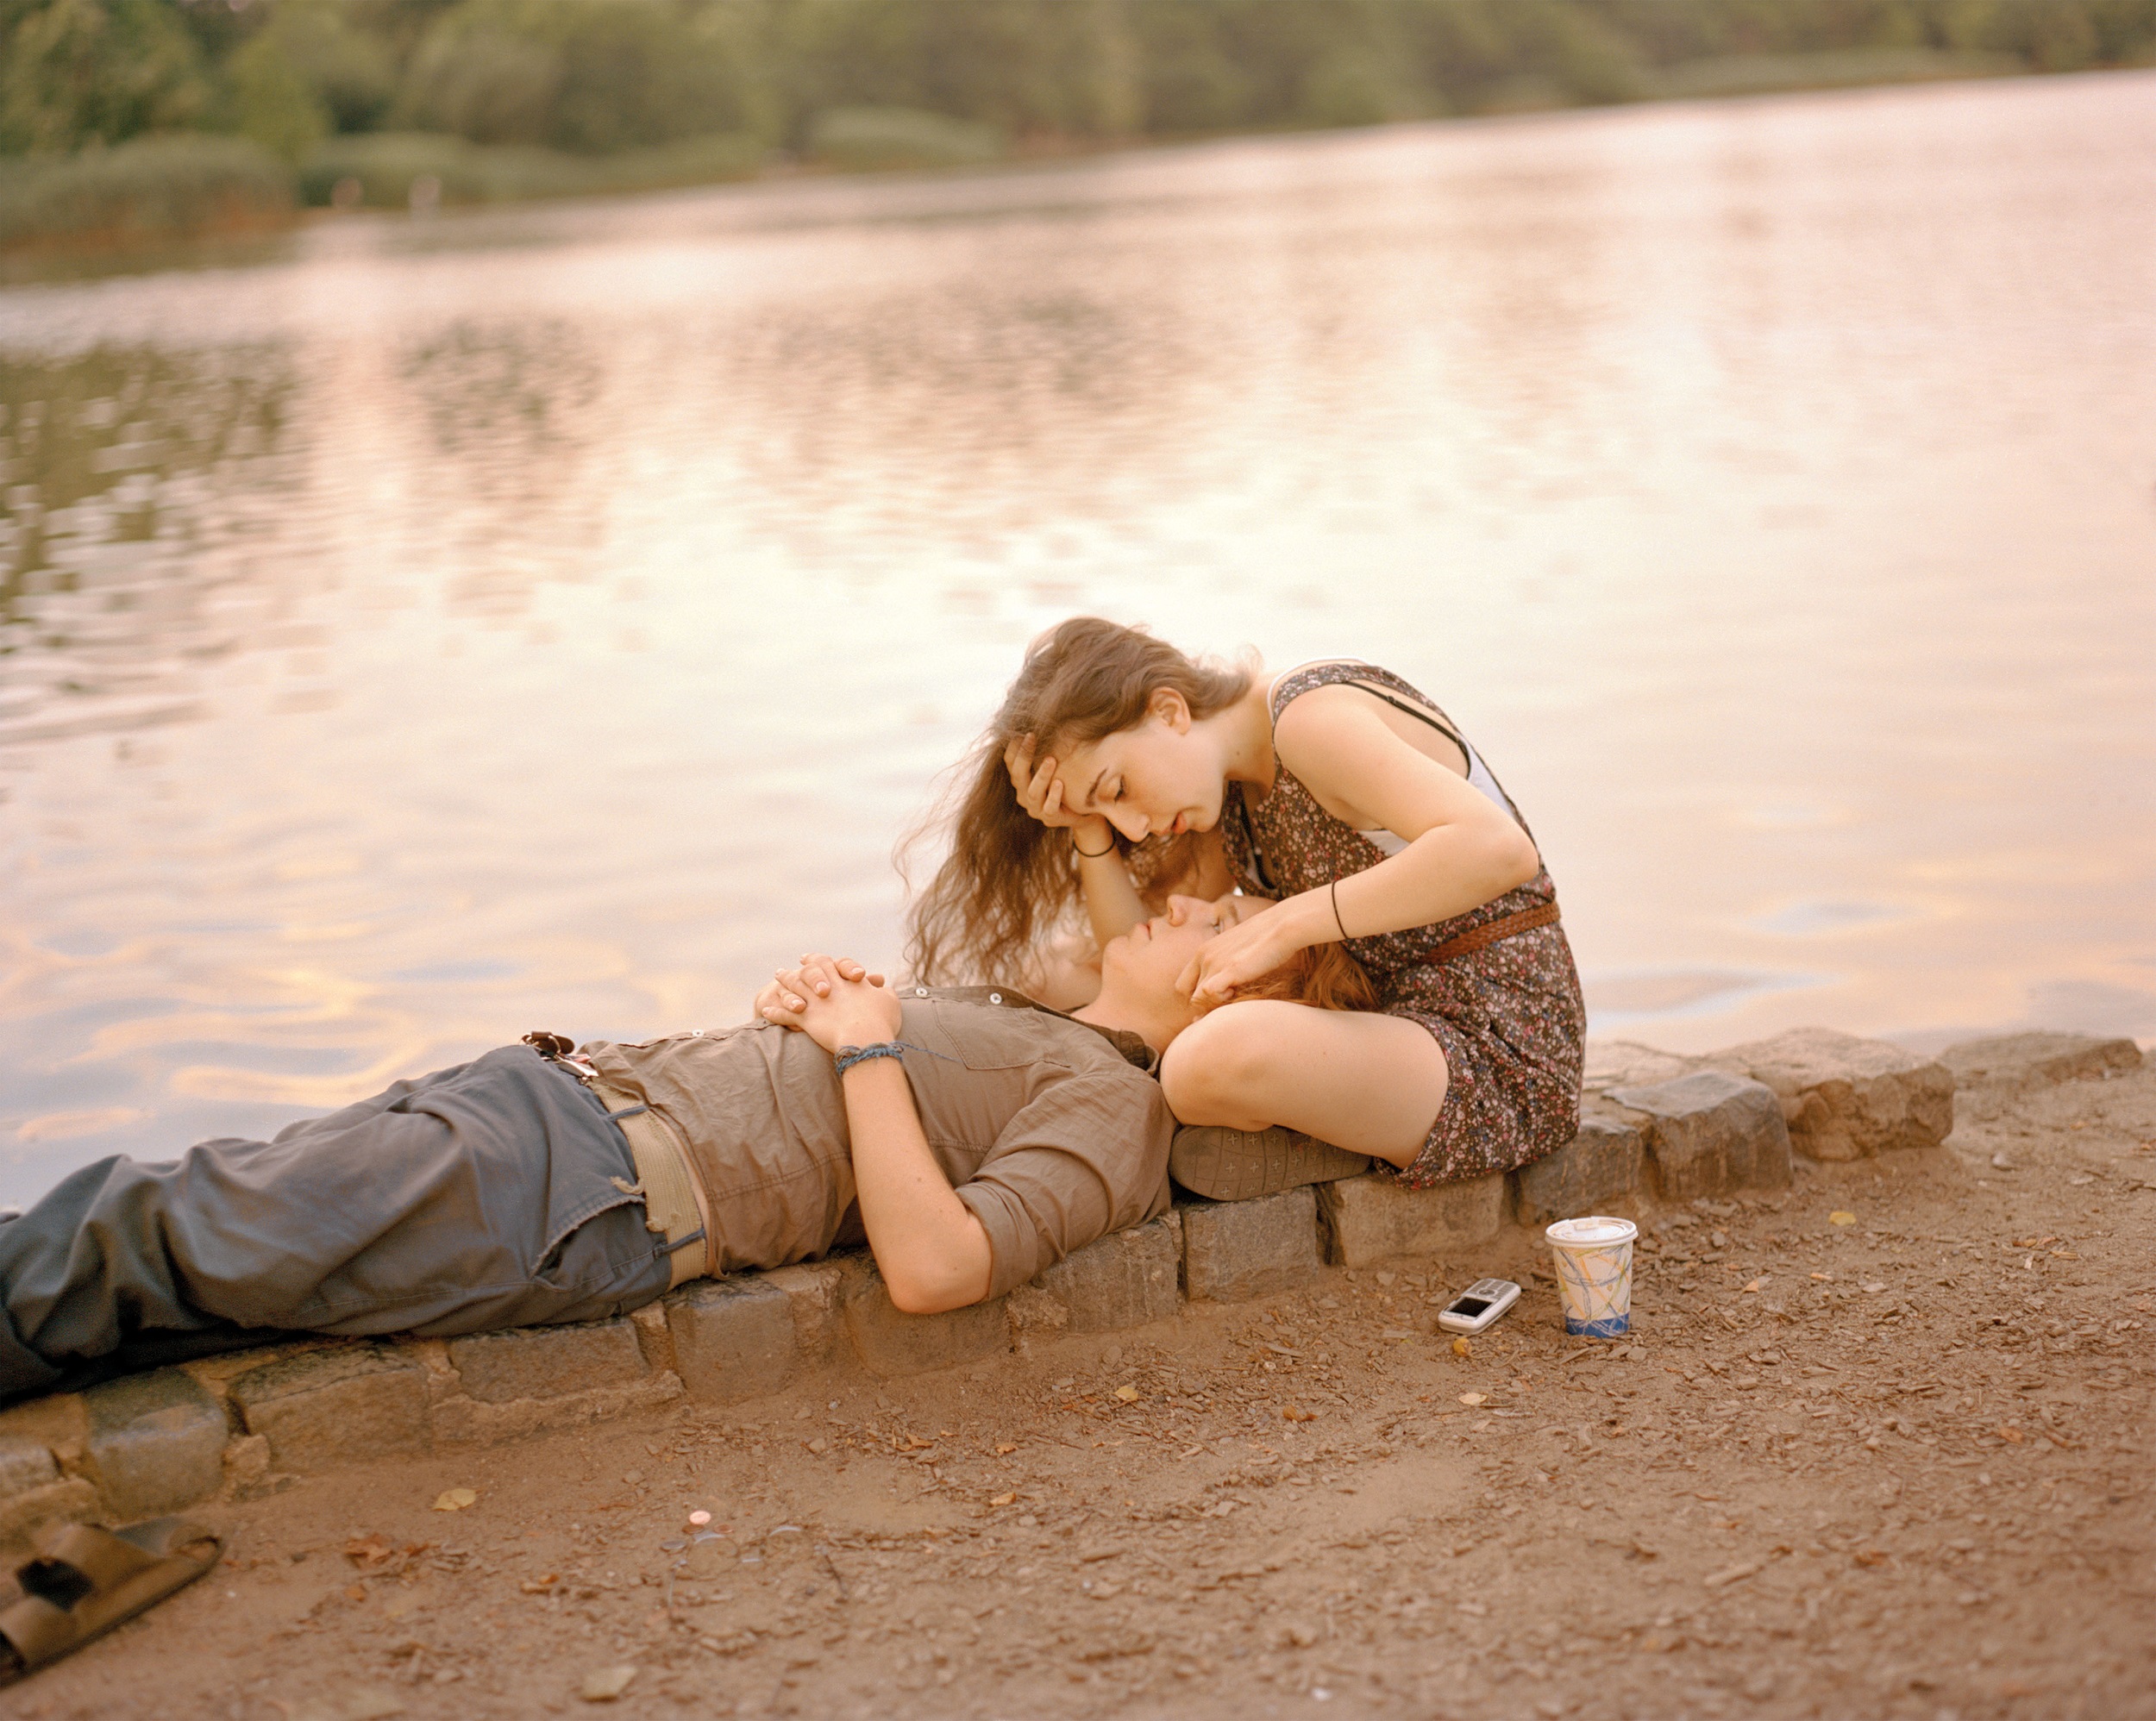 Color photograph of a young couple by the edge of a body of water. The man is lying down with his head int he woman's lap; beside her is a disposable coffee cup and a cell phone.